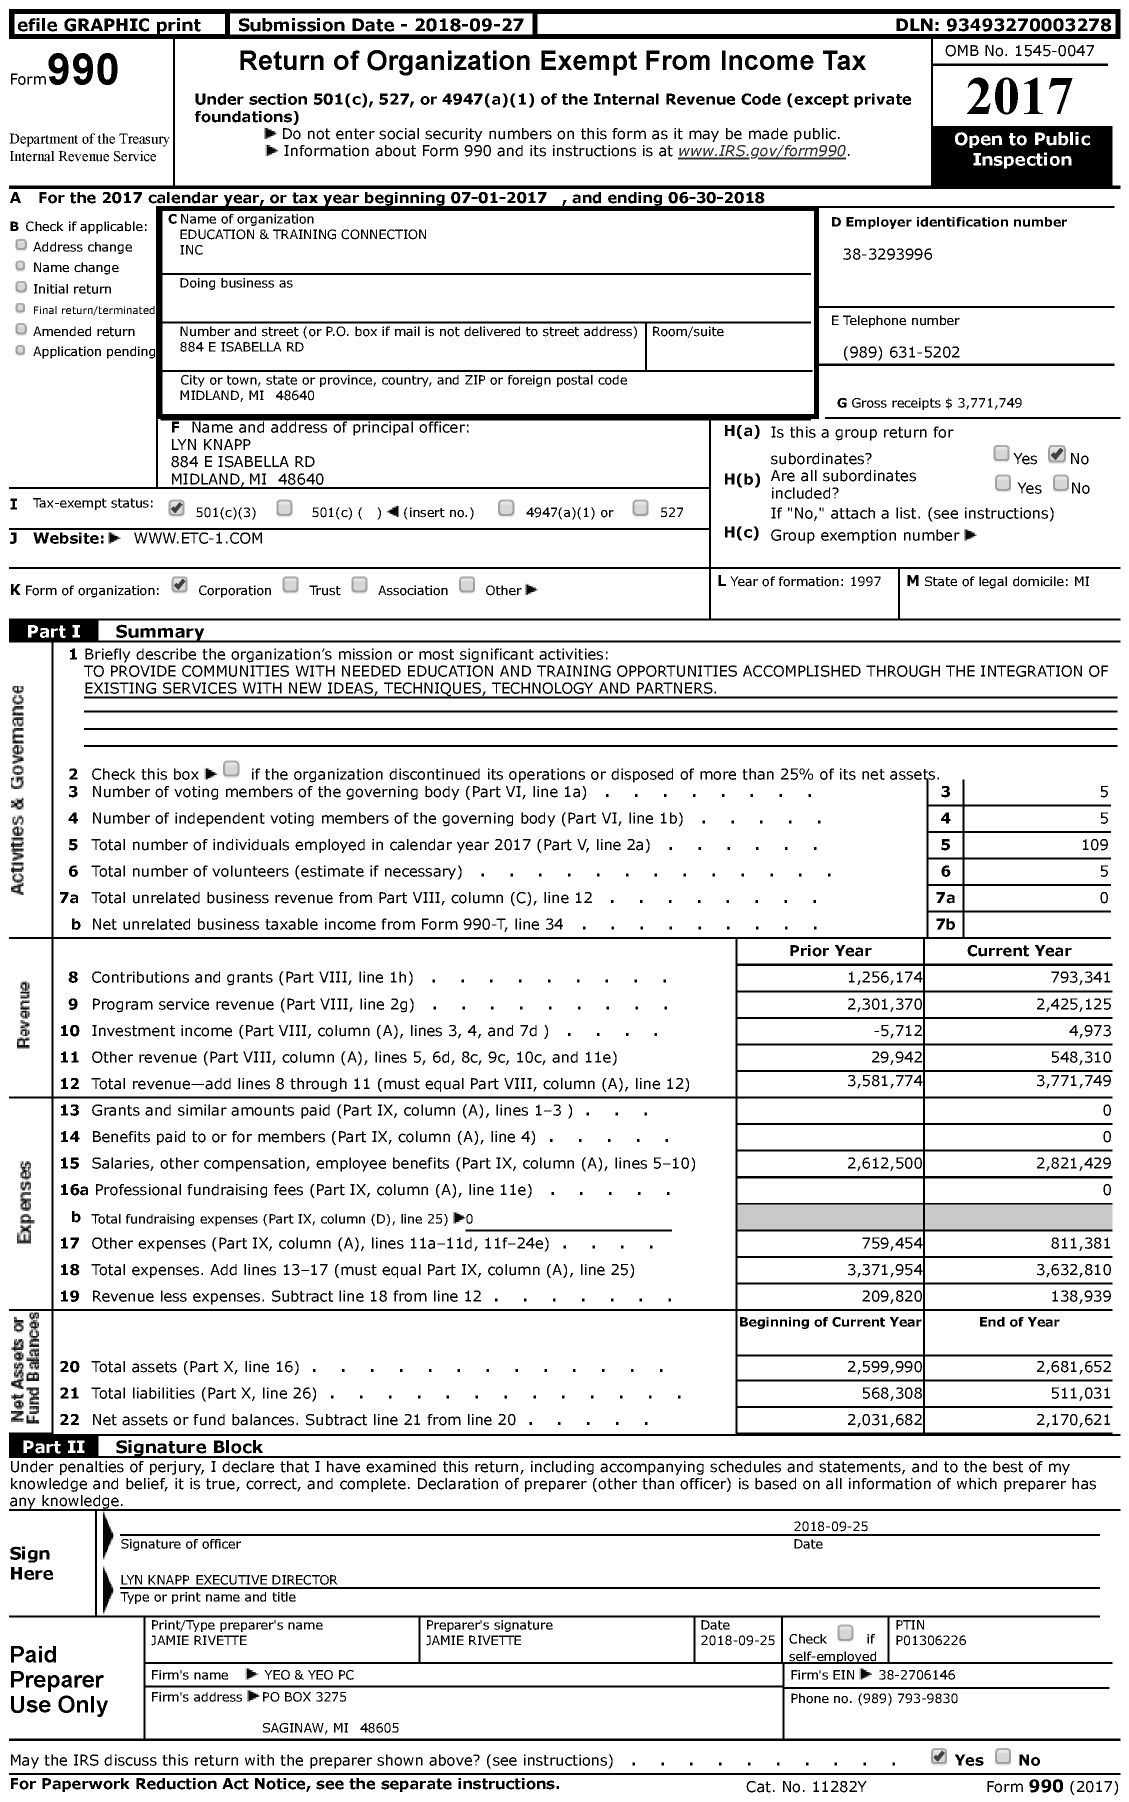 Image of first page of 2017 Form 990 for Education and Training Connection